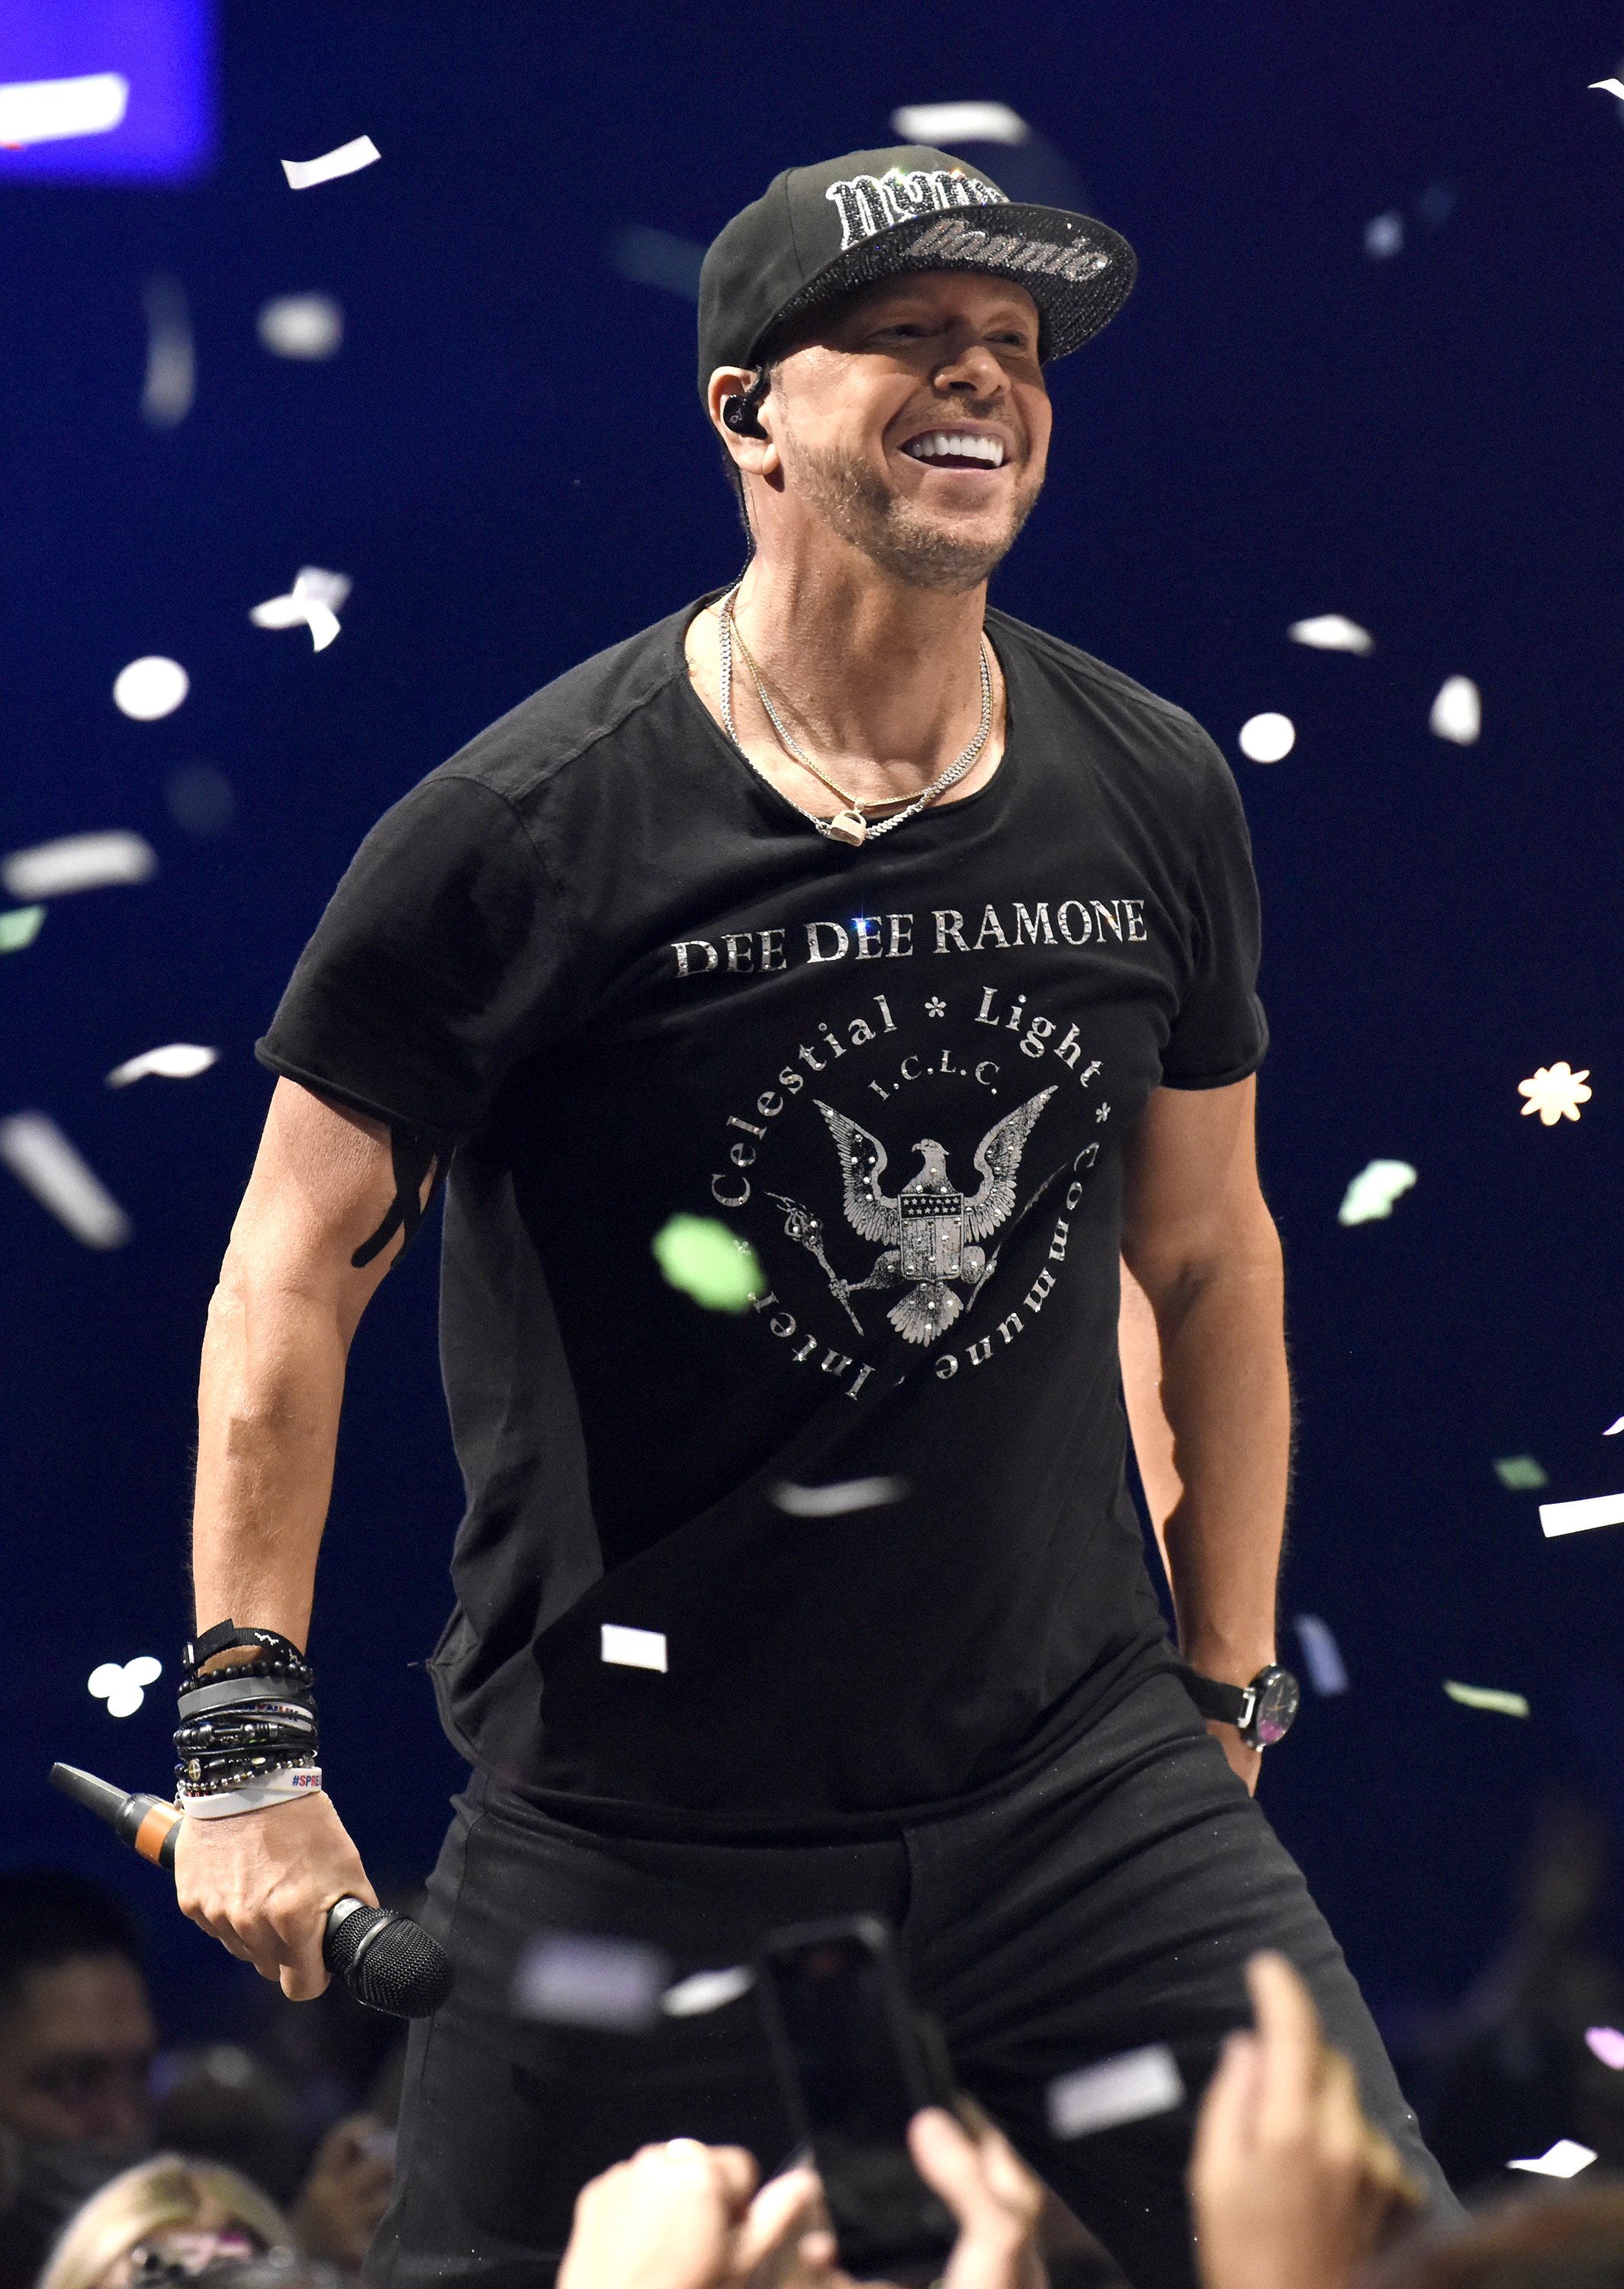 Donnie Wahlberg of New Kids on the Block performs in support of the band's "Mixtape" tour at Golden 1 Center on June 02, 2022, in Sacramento, California. | Source: Getty Images